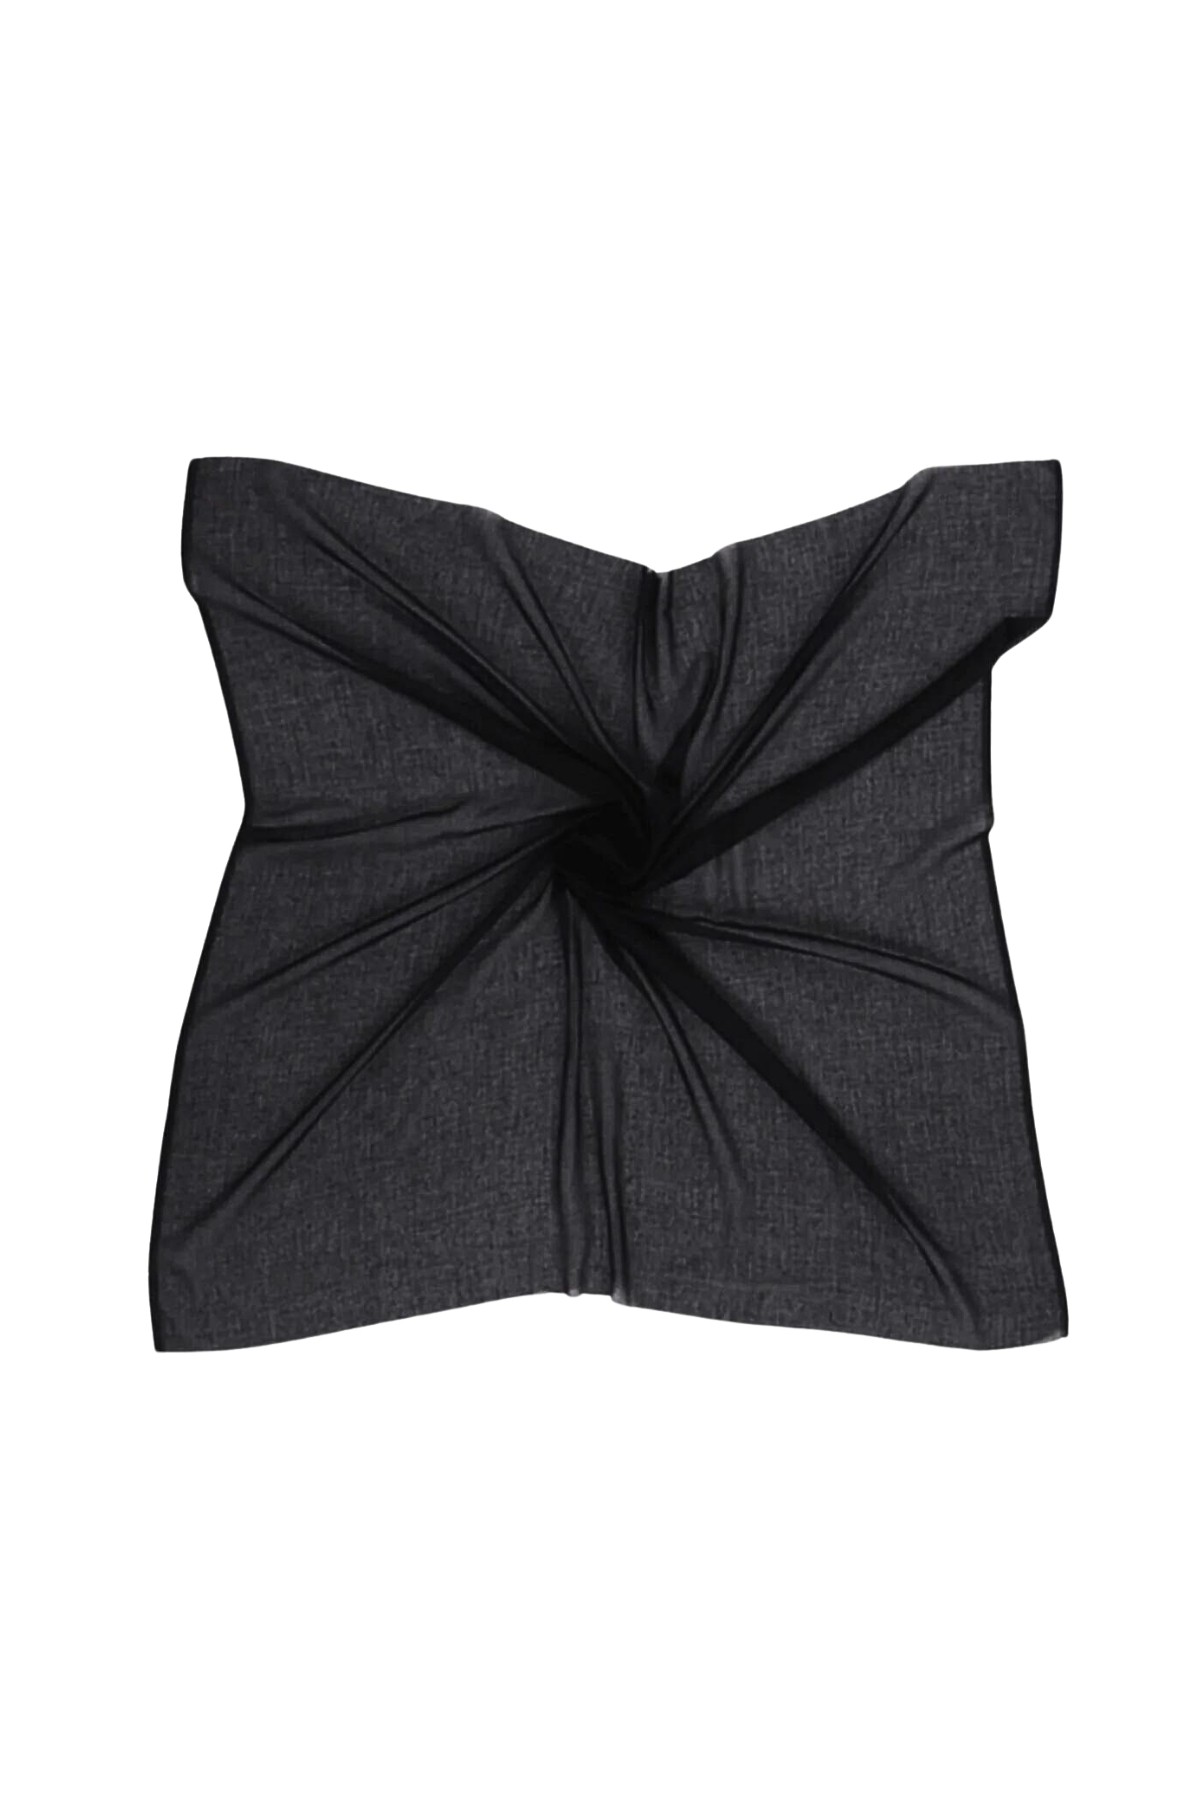 Cotton Inner Cheesecloth - Black